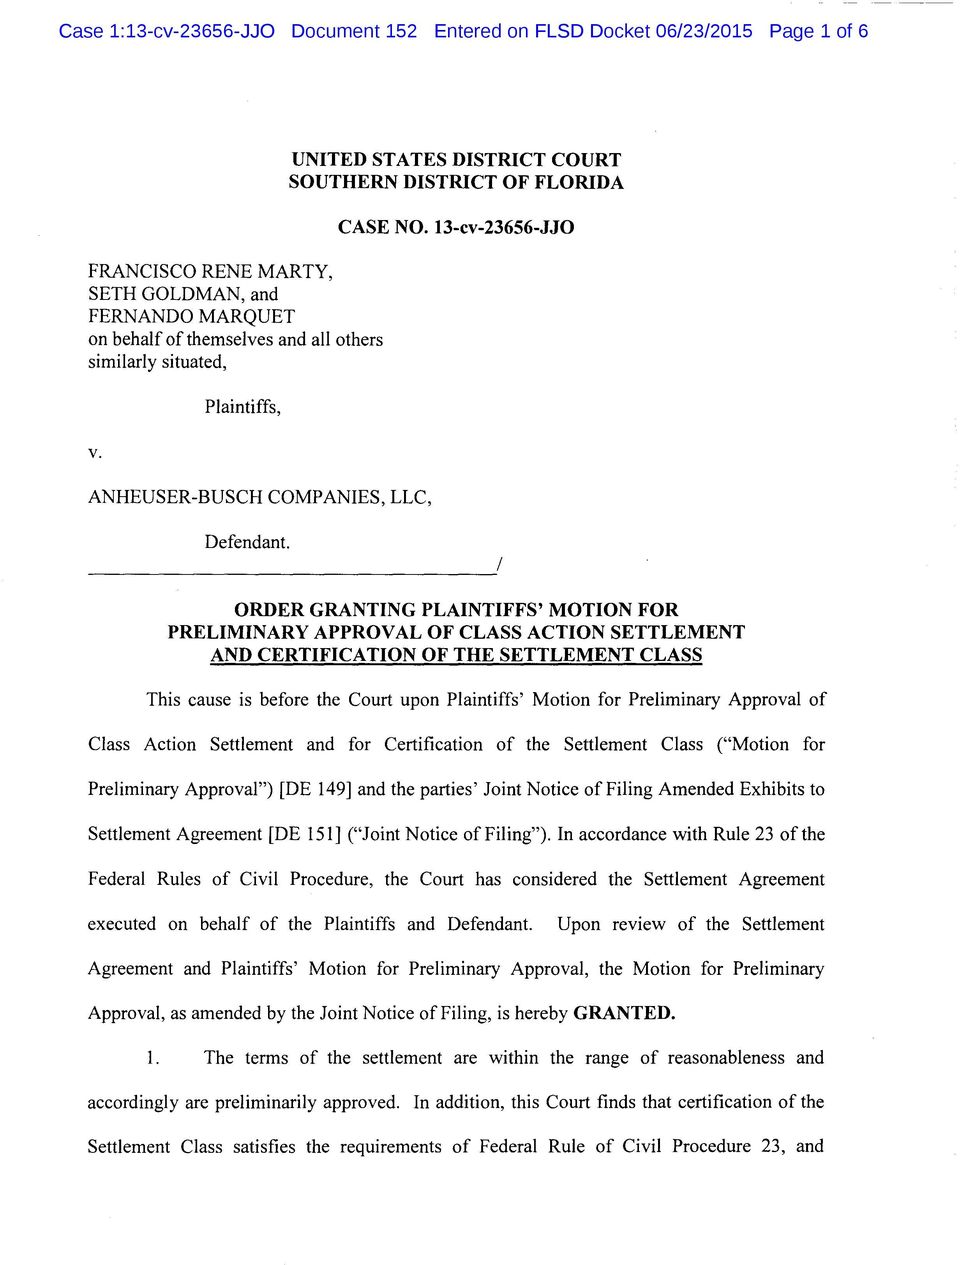 / ORDER GRANTING PLAINTIFFS' MOTION FOR PRELIMINARY APPROVAL OF CLASS ACTION SETTLEMENT AND CERTIFICATION OF THE SETTLEMENT CLASS This cause is before the Court upon Plaintiffs' Motion for